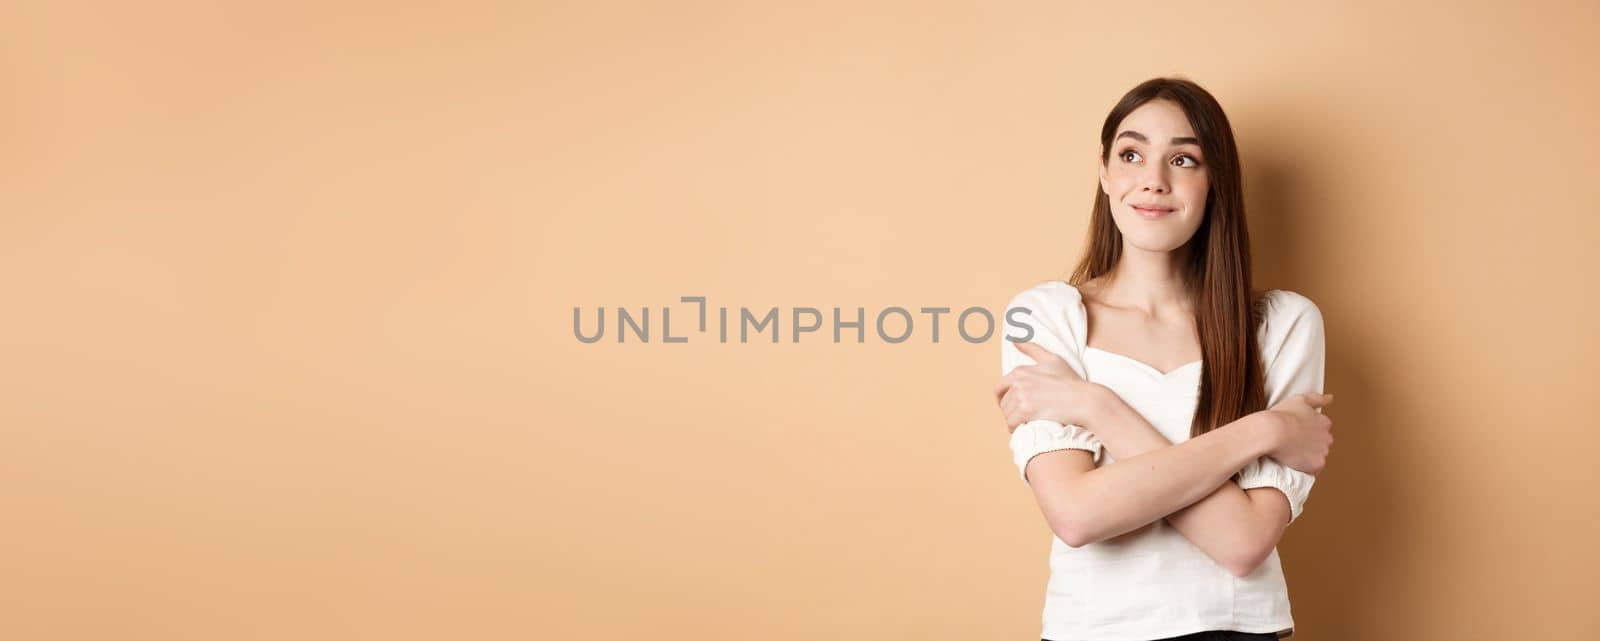 Romantic young girl dreaming, hugging herself and smiling at upper left corner, imaging something lovely, standing on beige background.